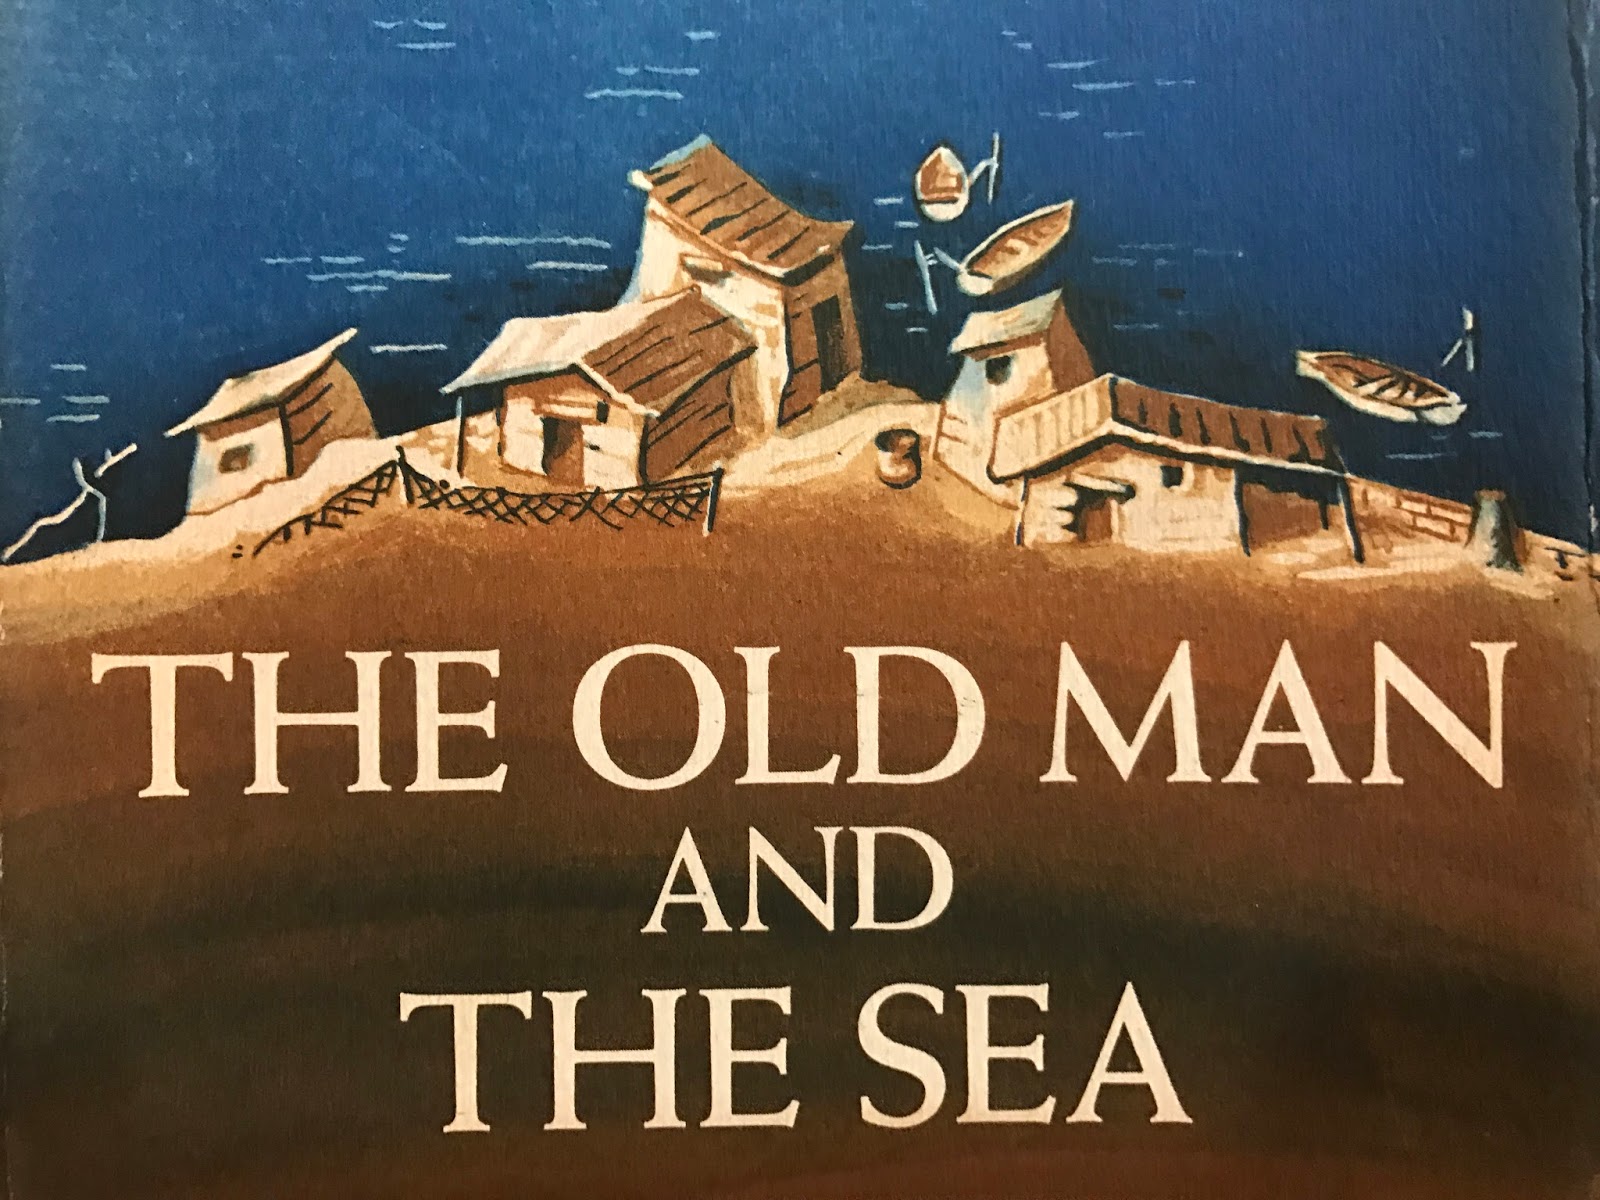 The Old Man And The Sea Bookporn Club